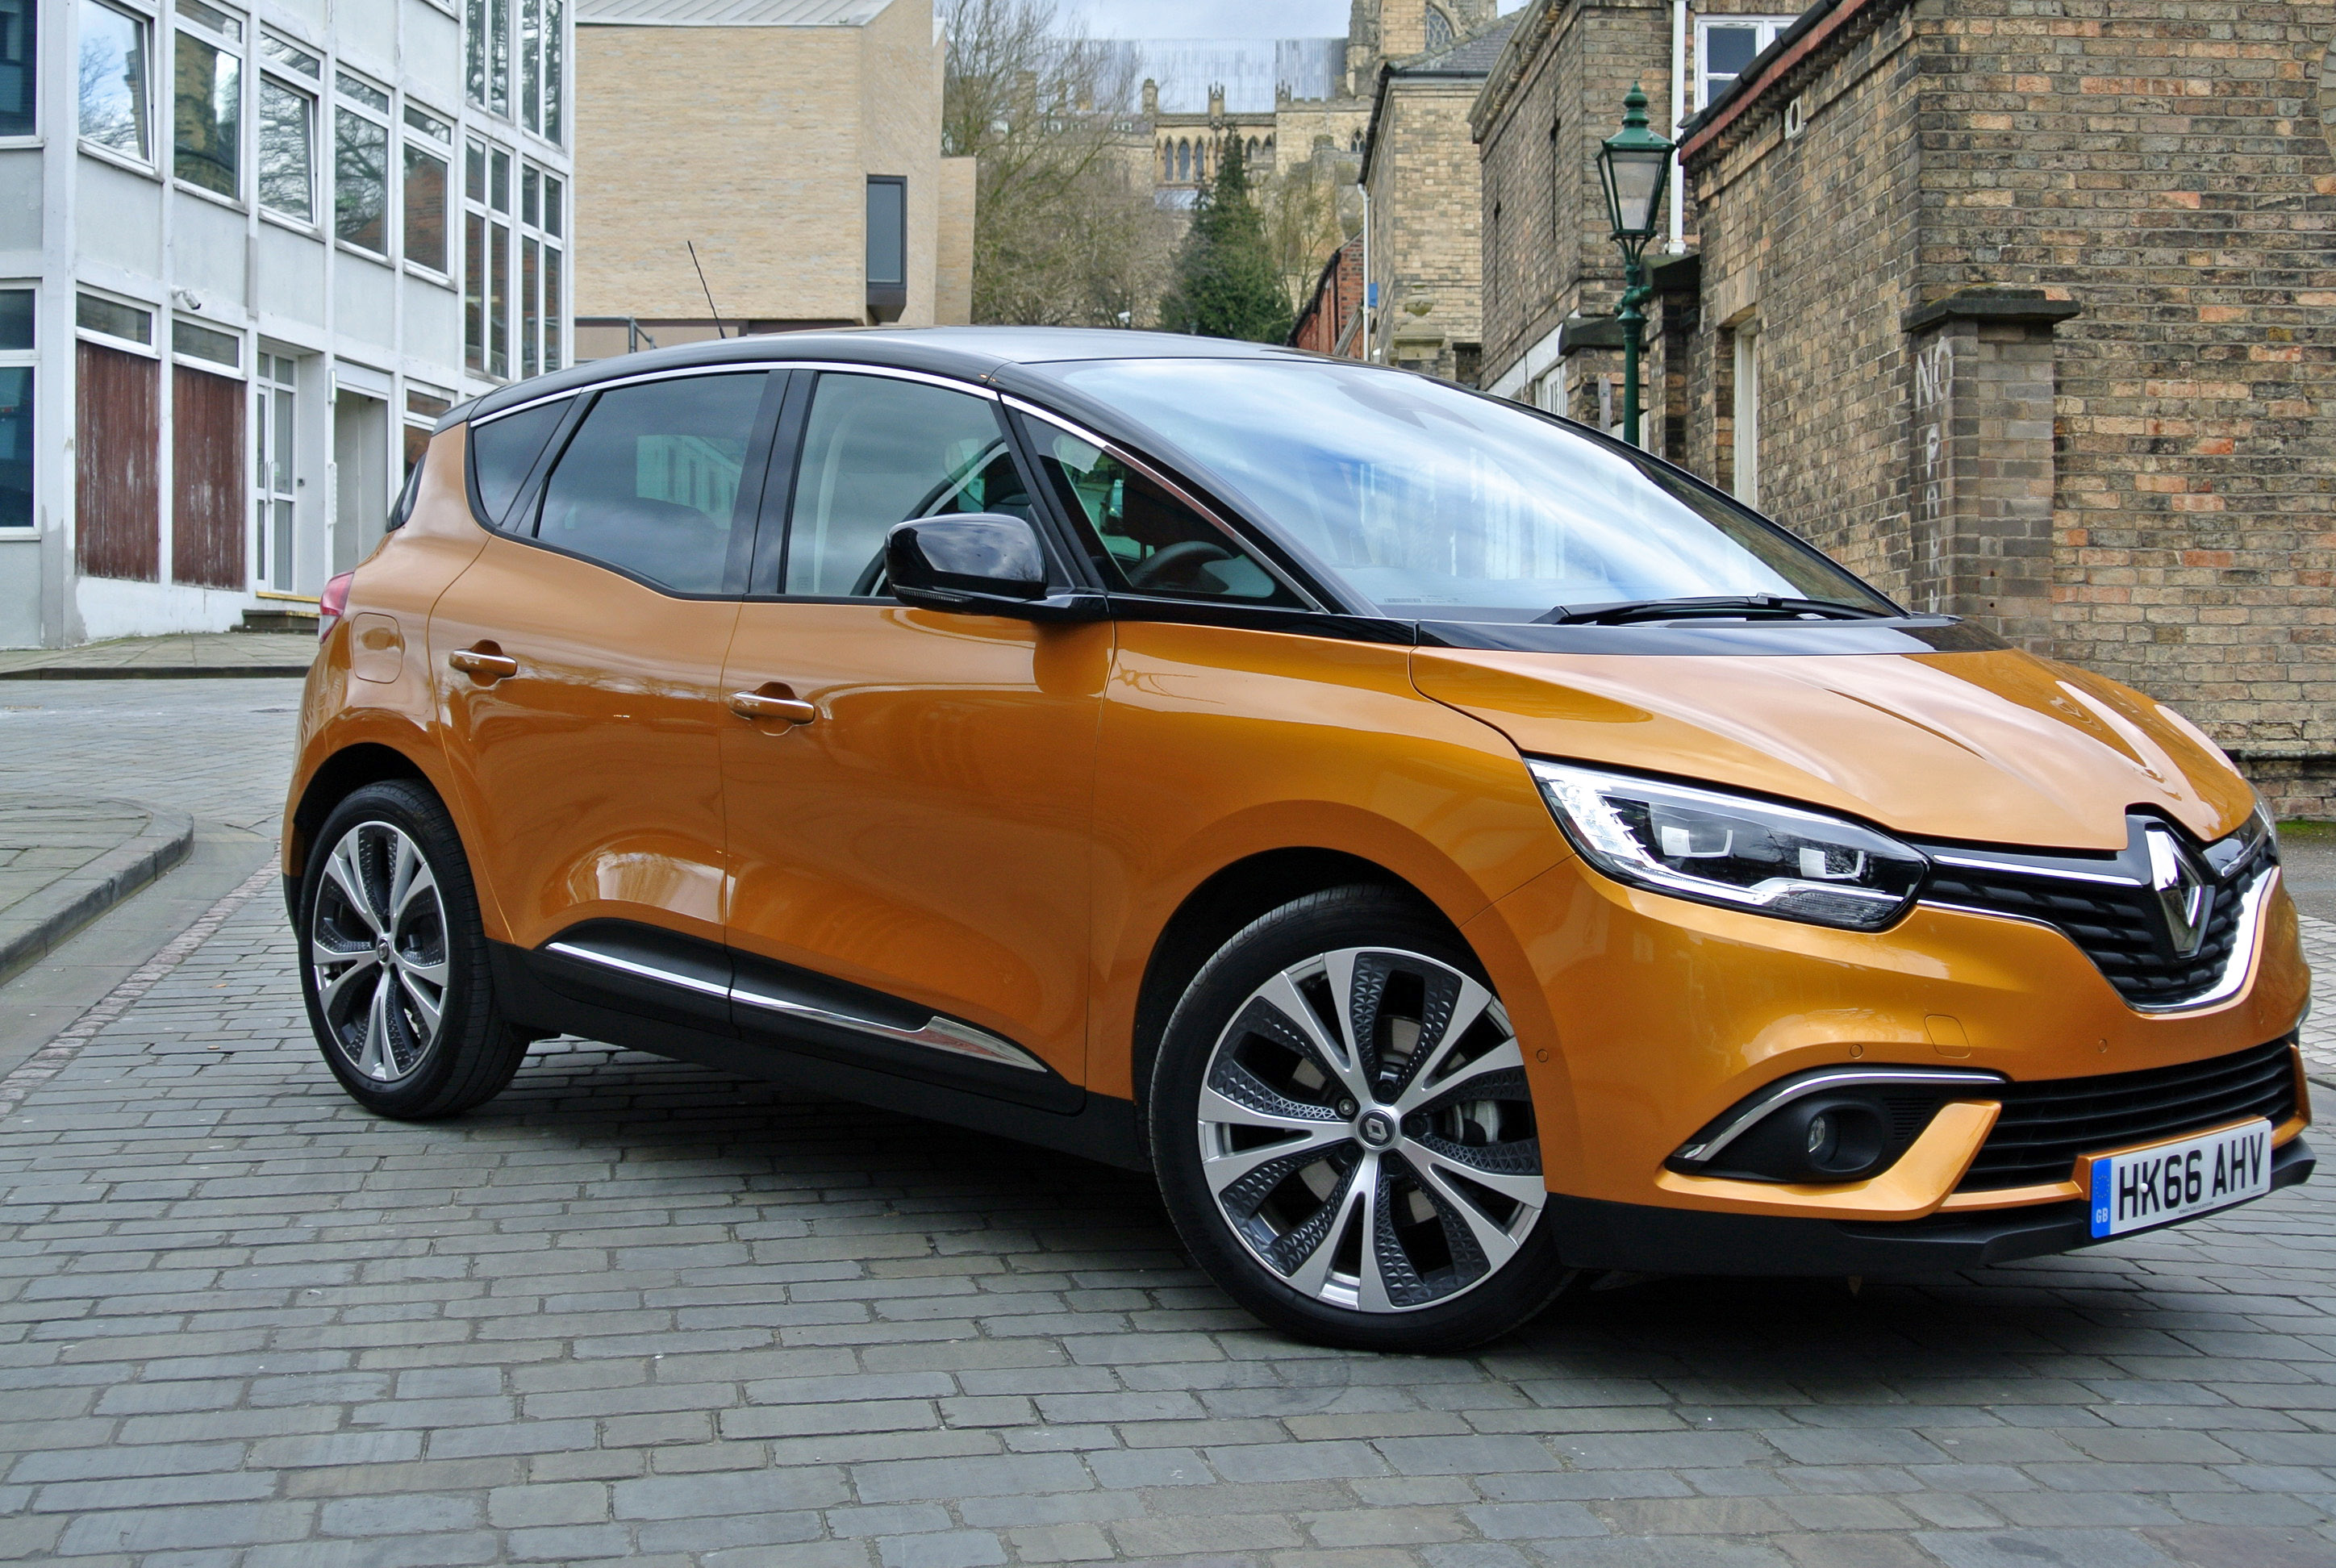 New Scenic model whisks Renault back to the top of the MPV pile